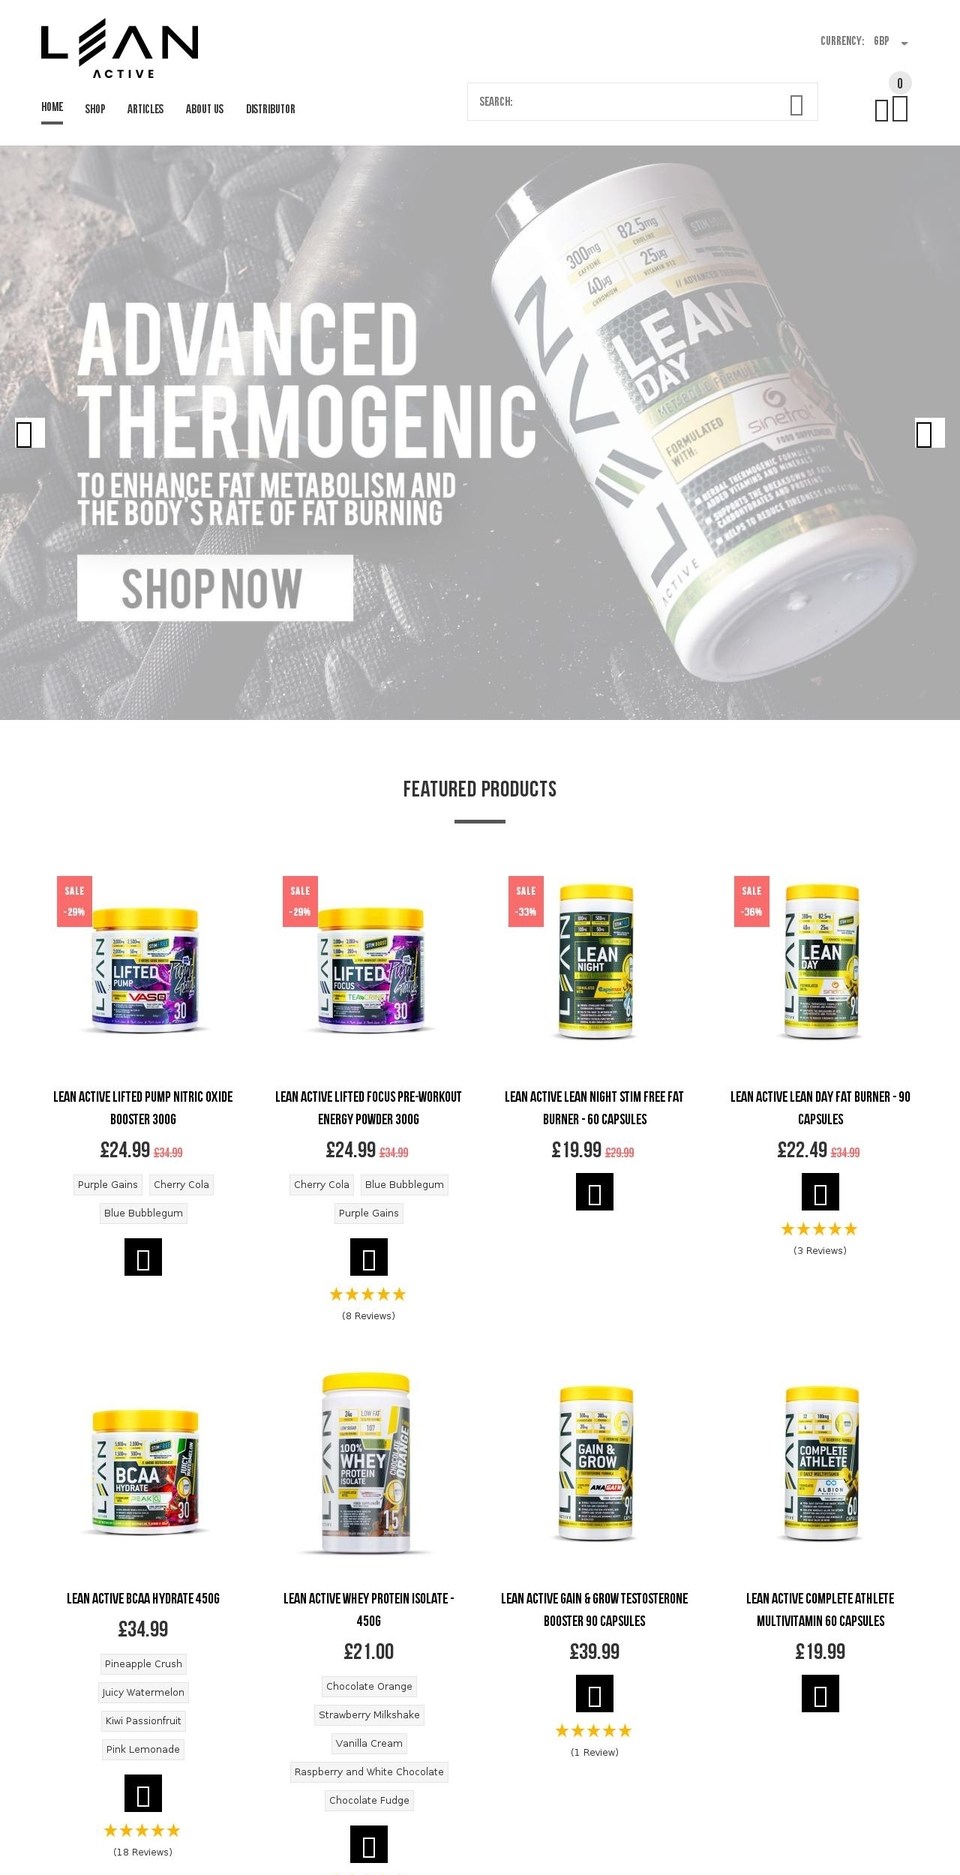 yourstore-v2-1-5 Shopify theme site example leanactive.com